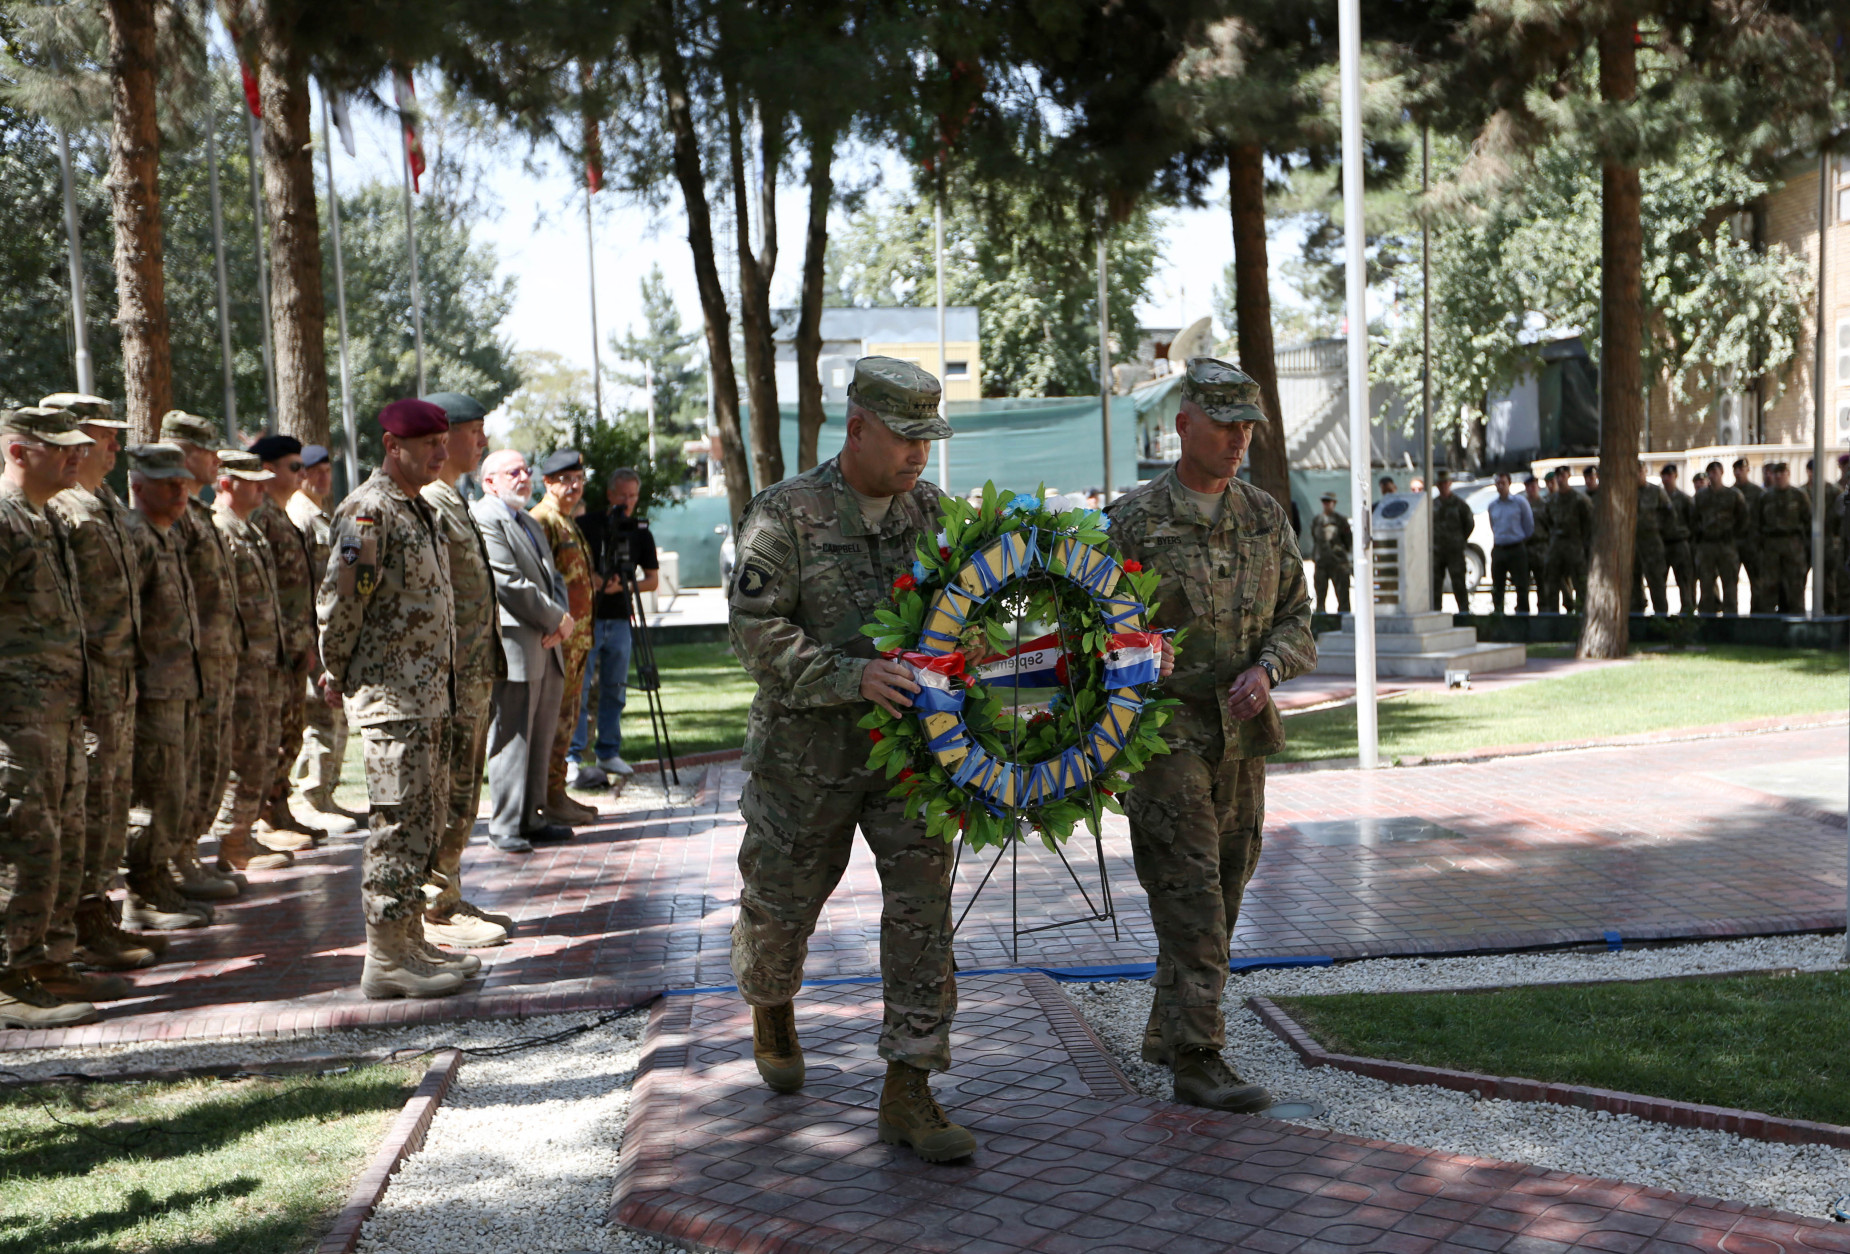 Commander of the International Security Assistance Force (ISAF), Gen. John Campbell, left, and Command Sergeant Major Delbert Byers, right, carry a wreath during a memorial ceremony on the fourteenth anniversary of the 9-11 terrorist attacks on the United States at the headquarters of the International Security Assistance Force, in Kabul, Afghanistan, Friday, Sept. 11, 2015. (AP Photo/Rahmat Gul)